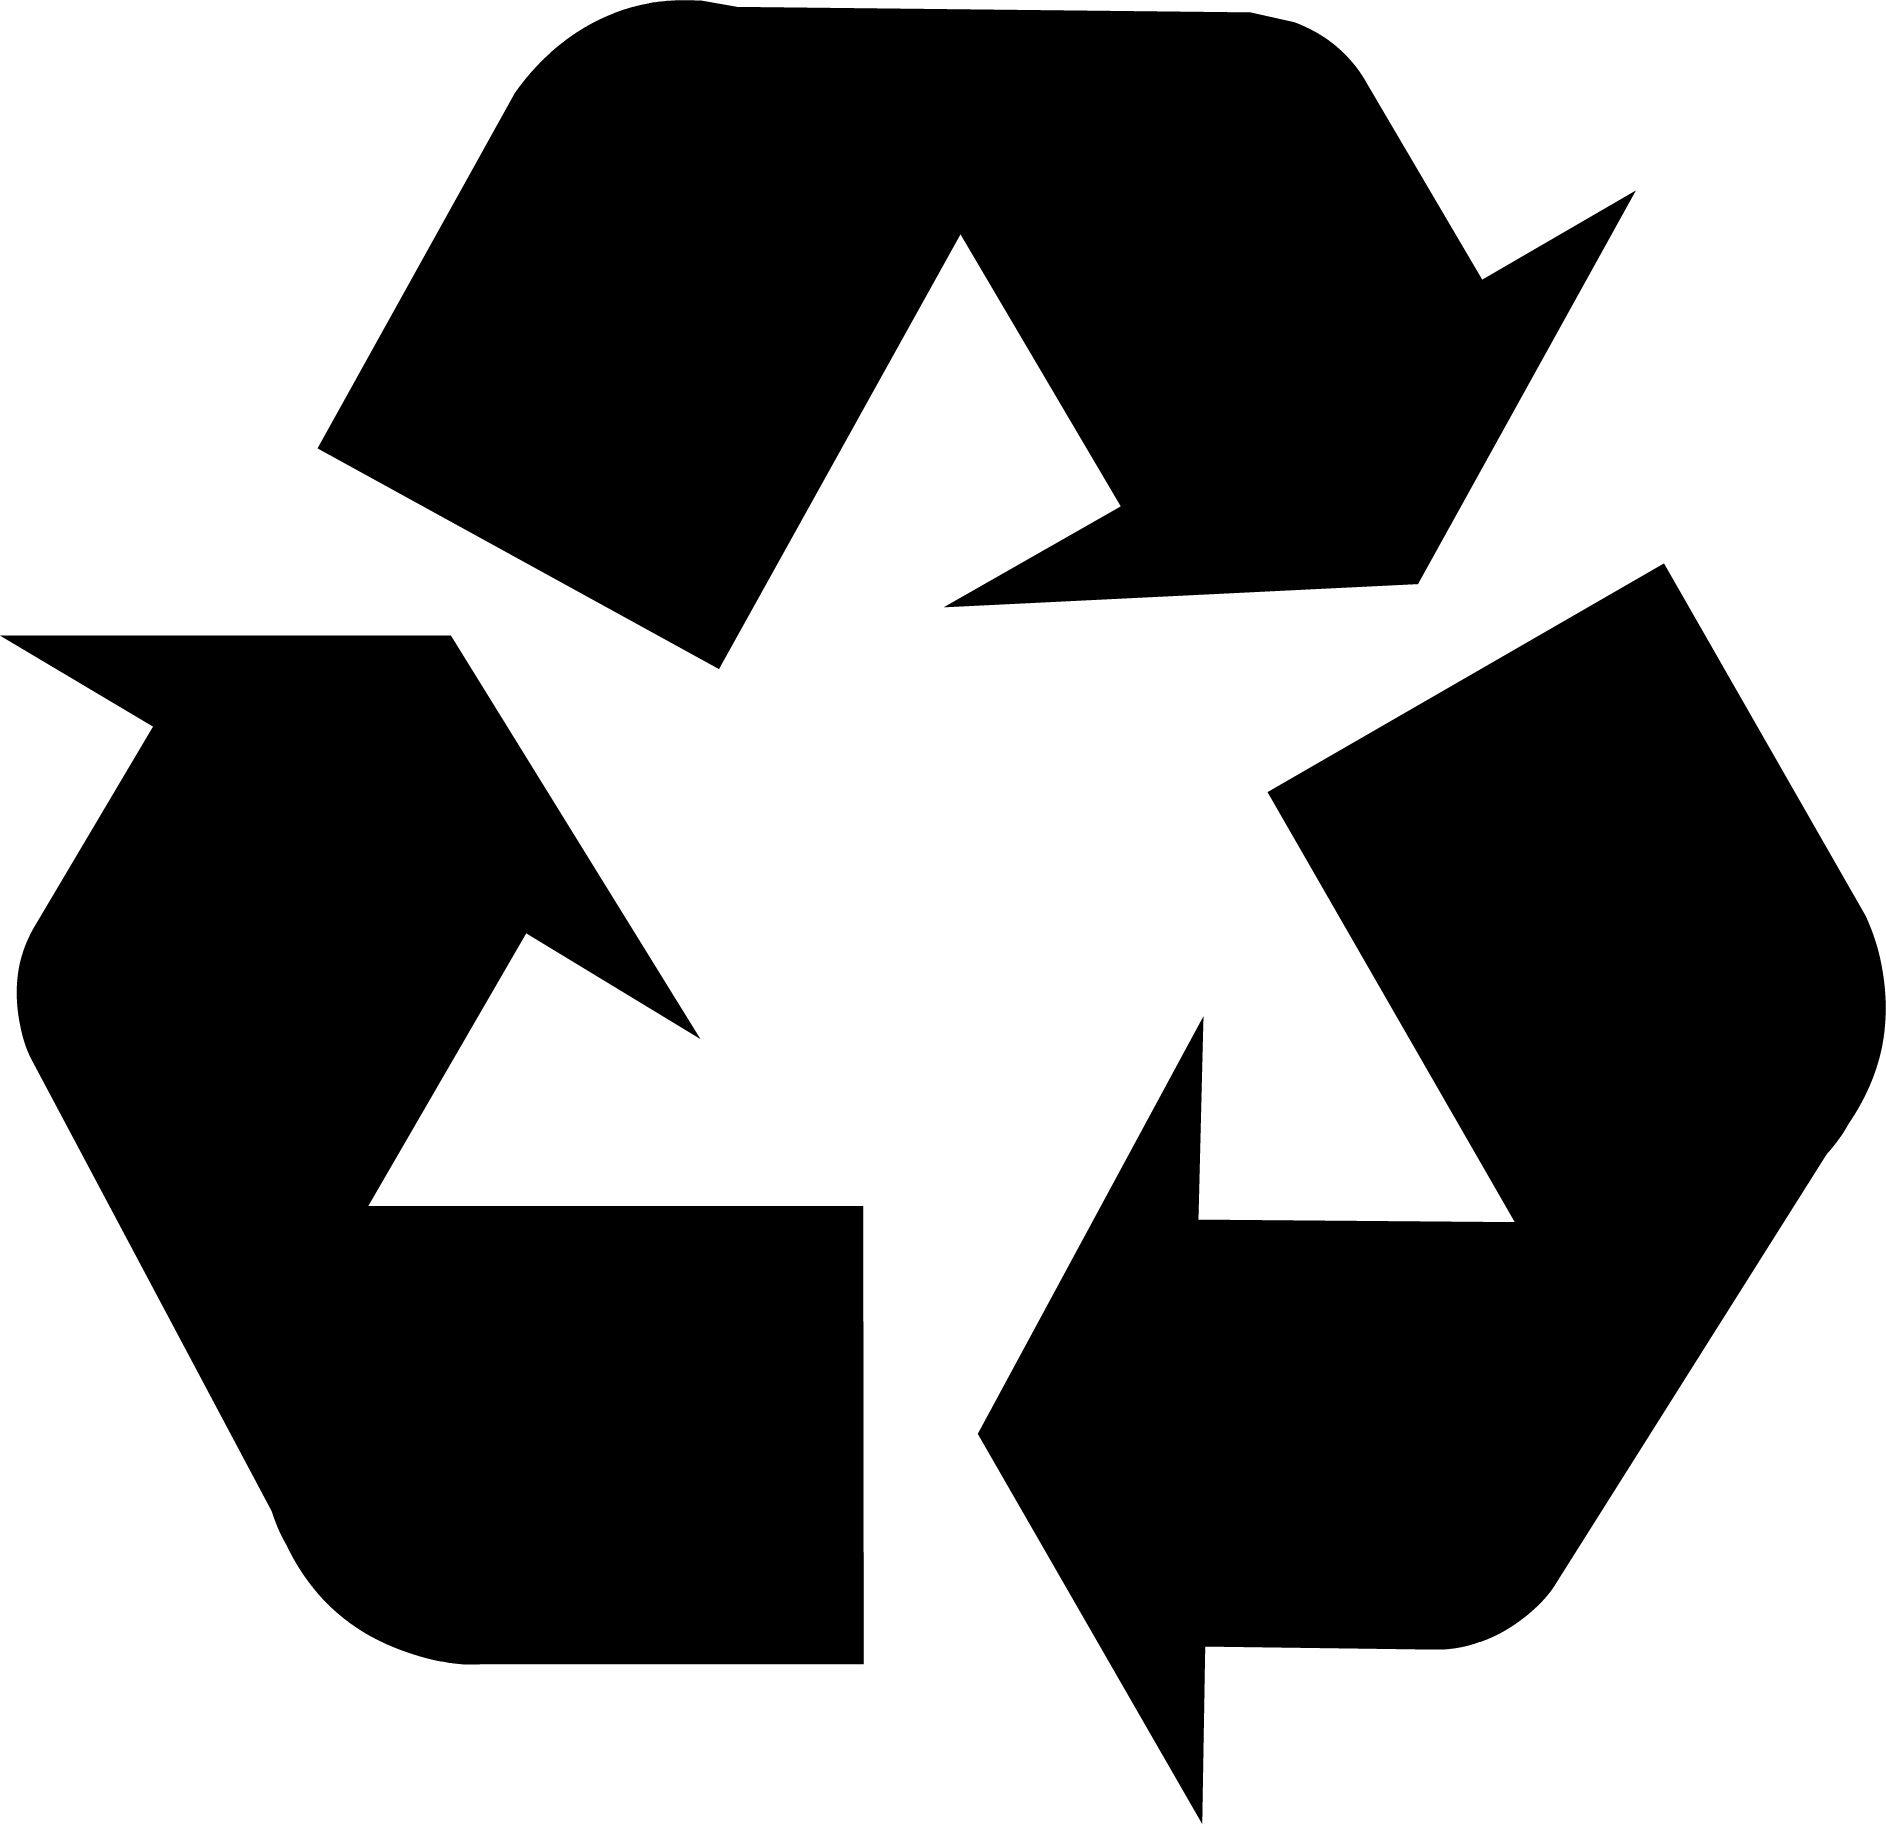 U of a Black and White Logo - Recycling Symbol - Download the Original Recycle Logo